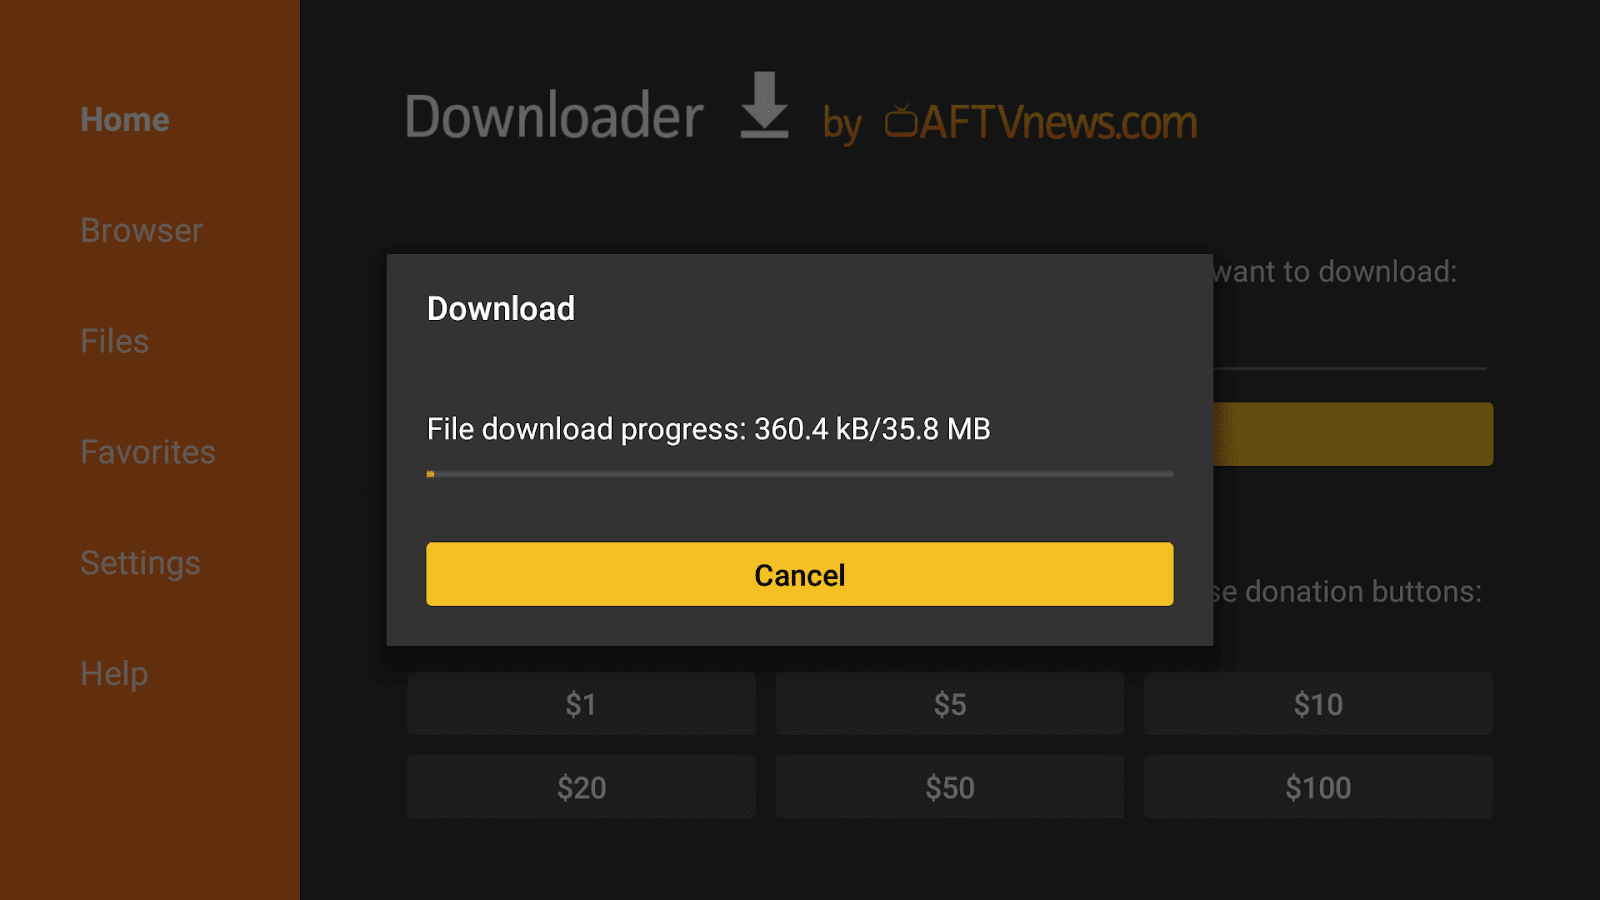 start the download